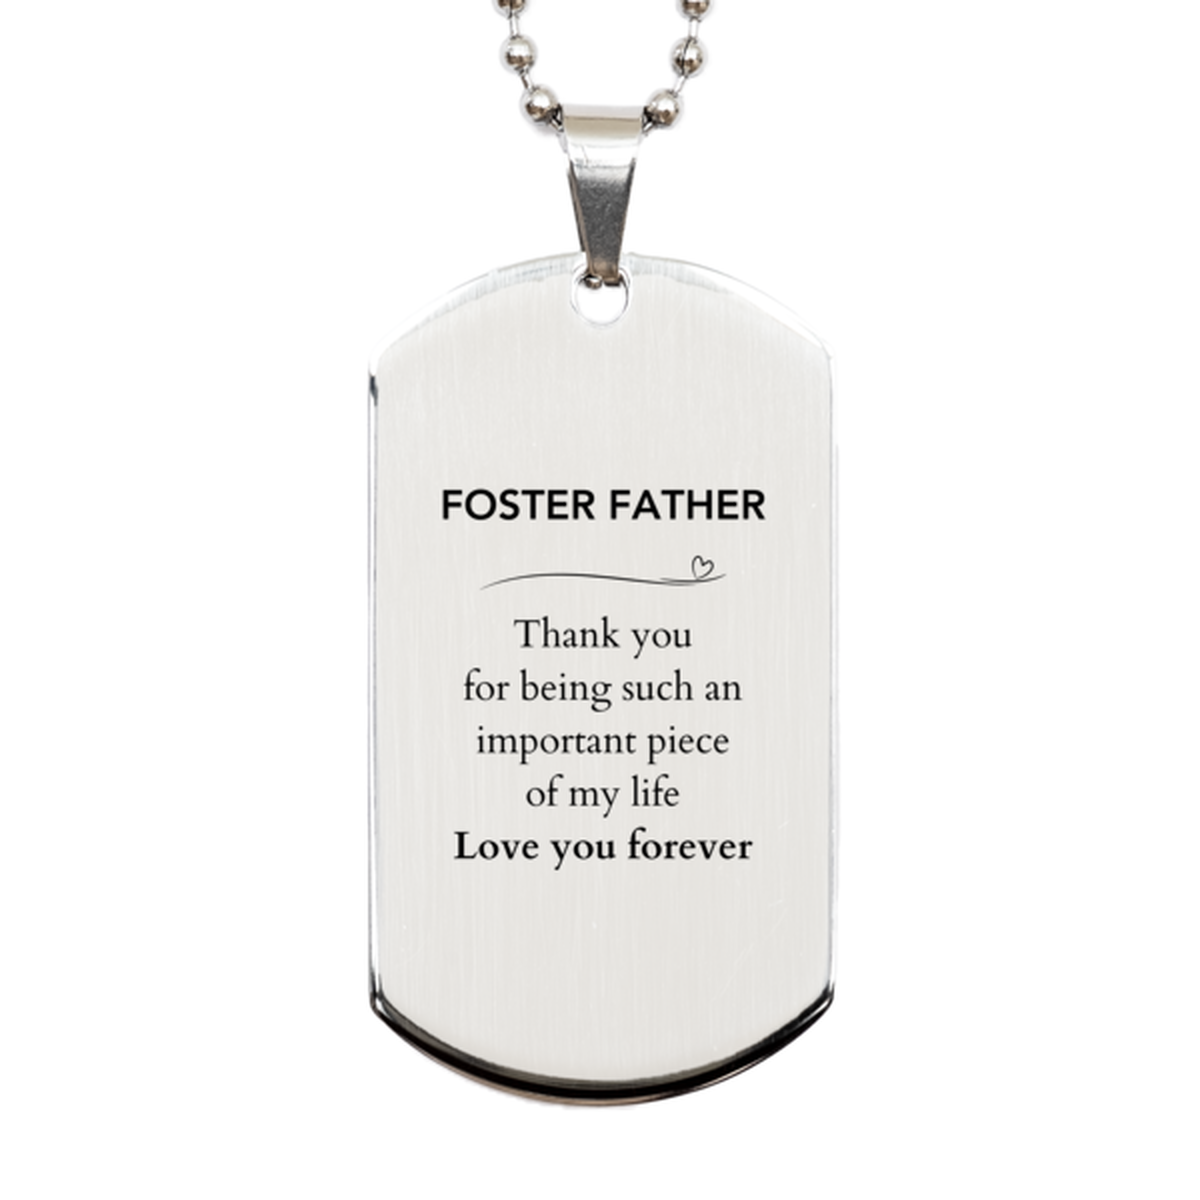 Appropriate Foster Father Silver Dog Tag Epic Birthday Gifts for Foster Father Thank you for being such an important piece of my life Foster Father Christmas Mothers Fathers Day